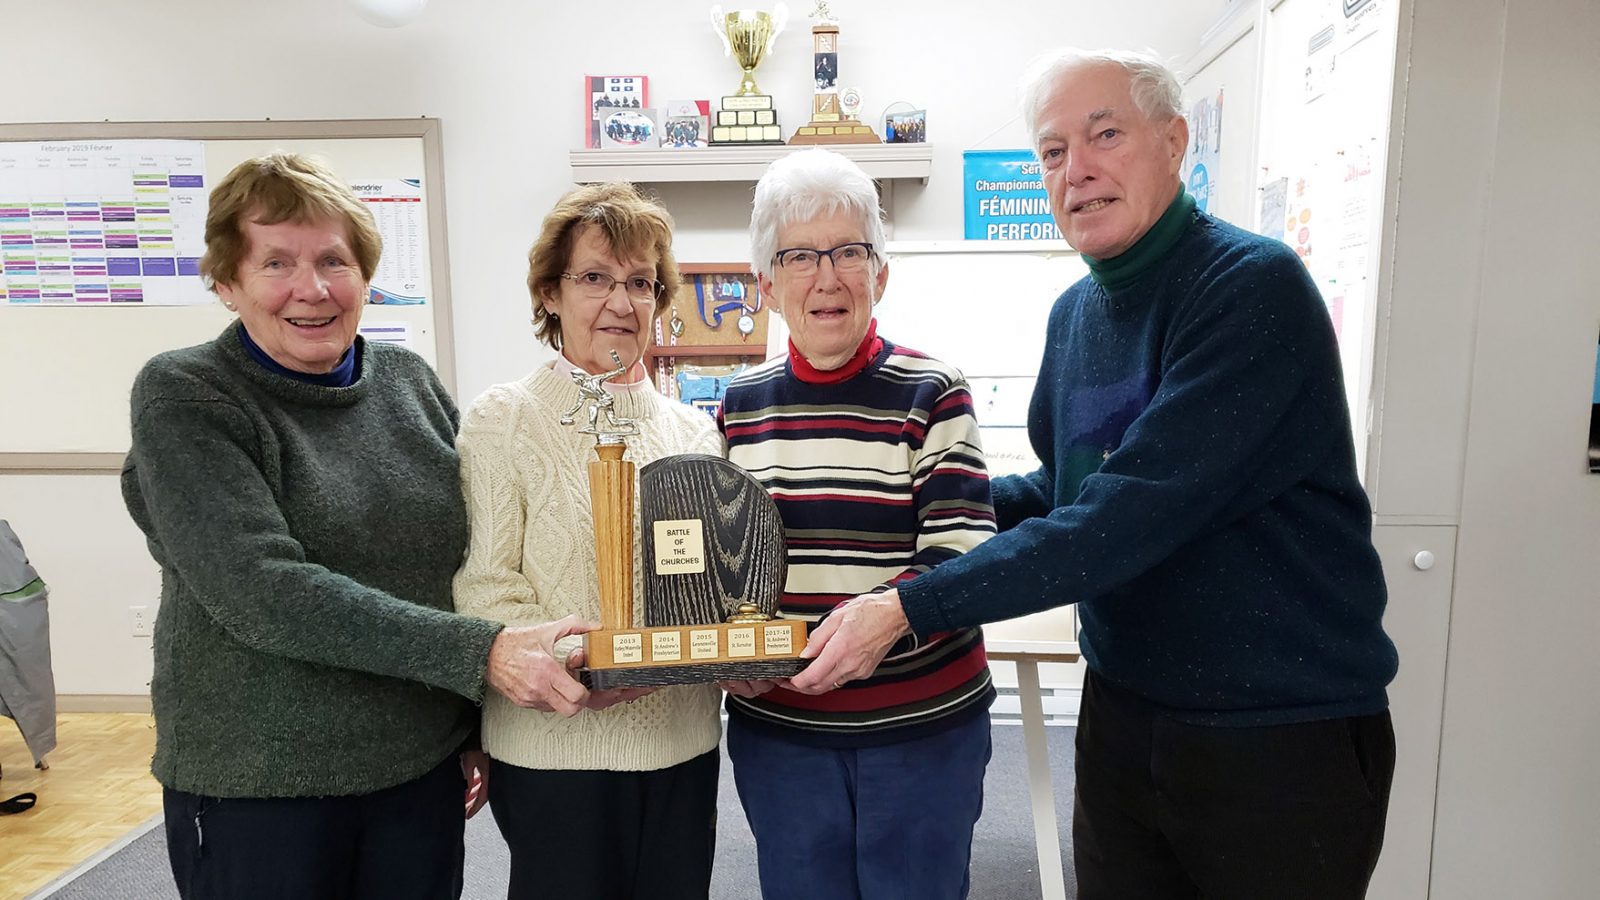 St-George’s Anglican Church takes the trophy